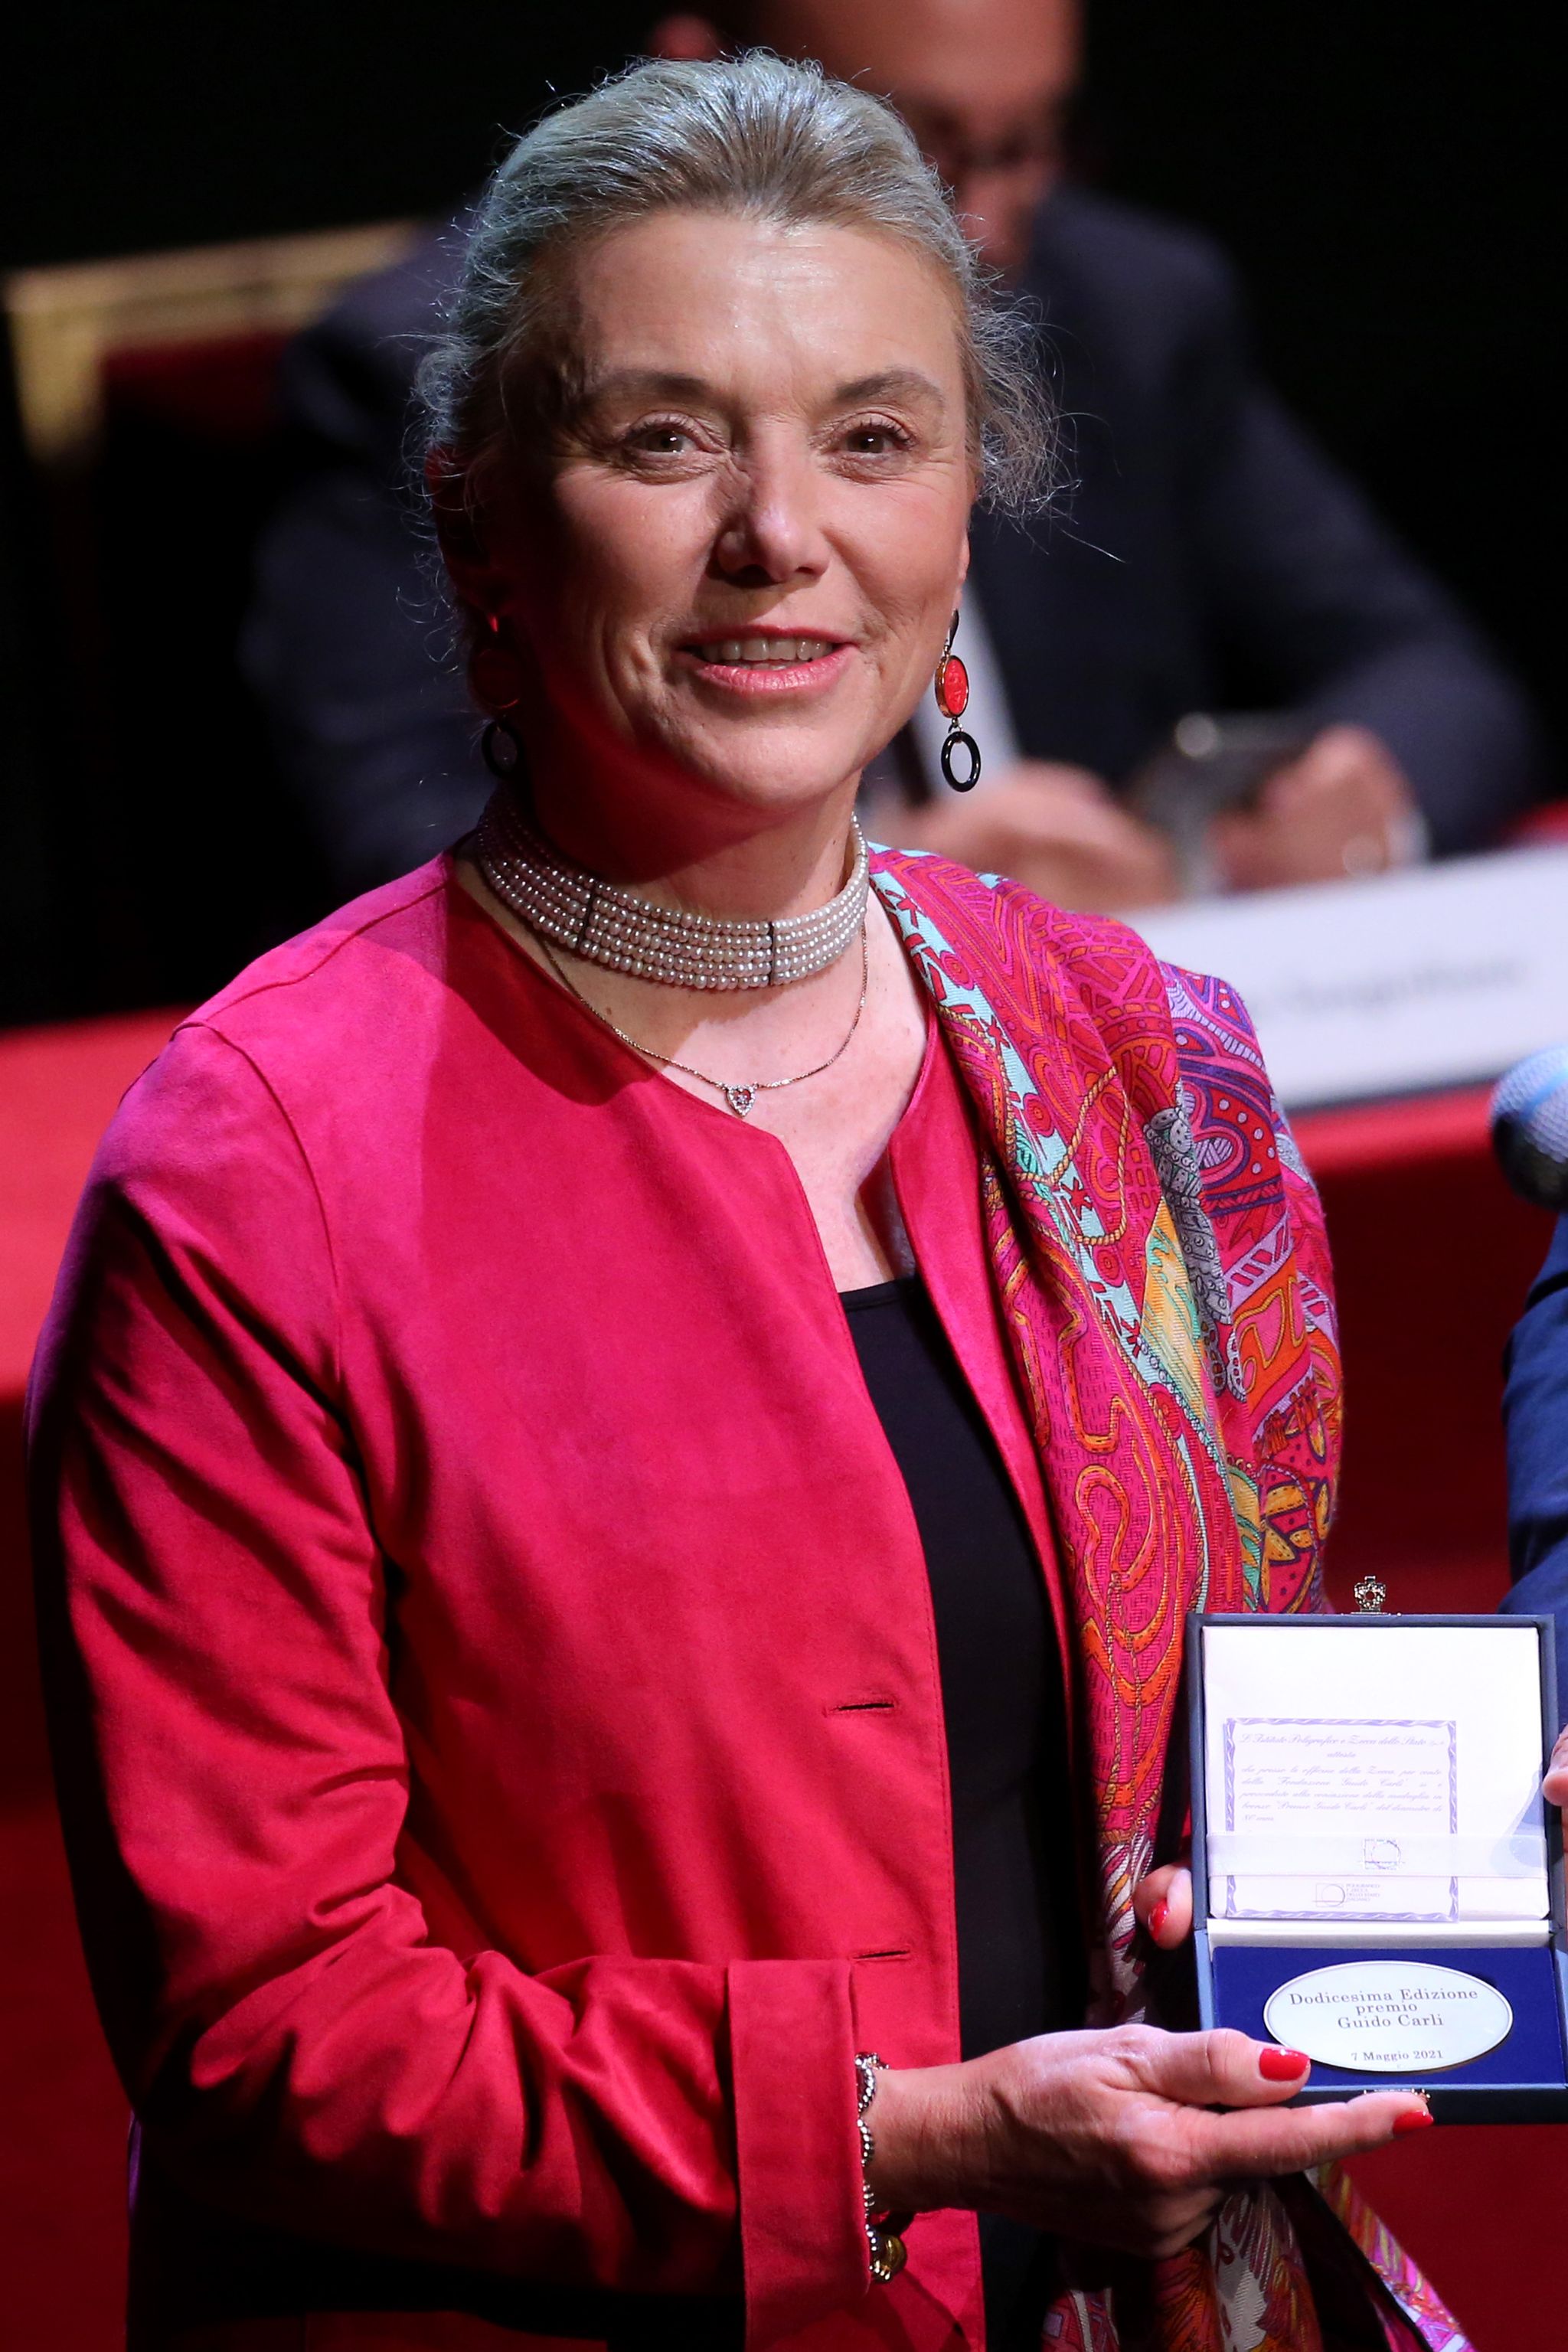 rome, italy   may 07 secretary general of the ministry of foreign affairs elisabetta belloni l receives the guido carli prize at auditorium parco della musica on may 07, 2021 in rome, italy photo by franco origliagetty images